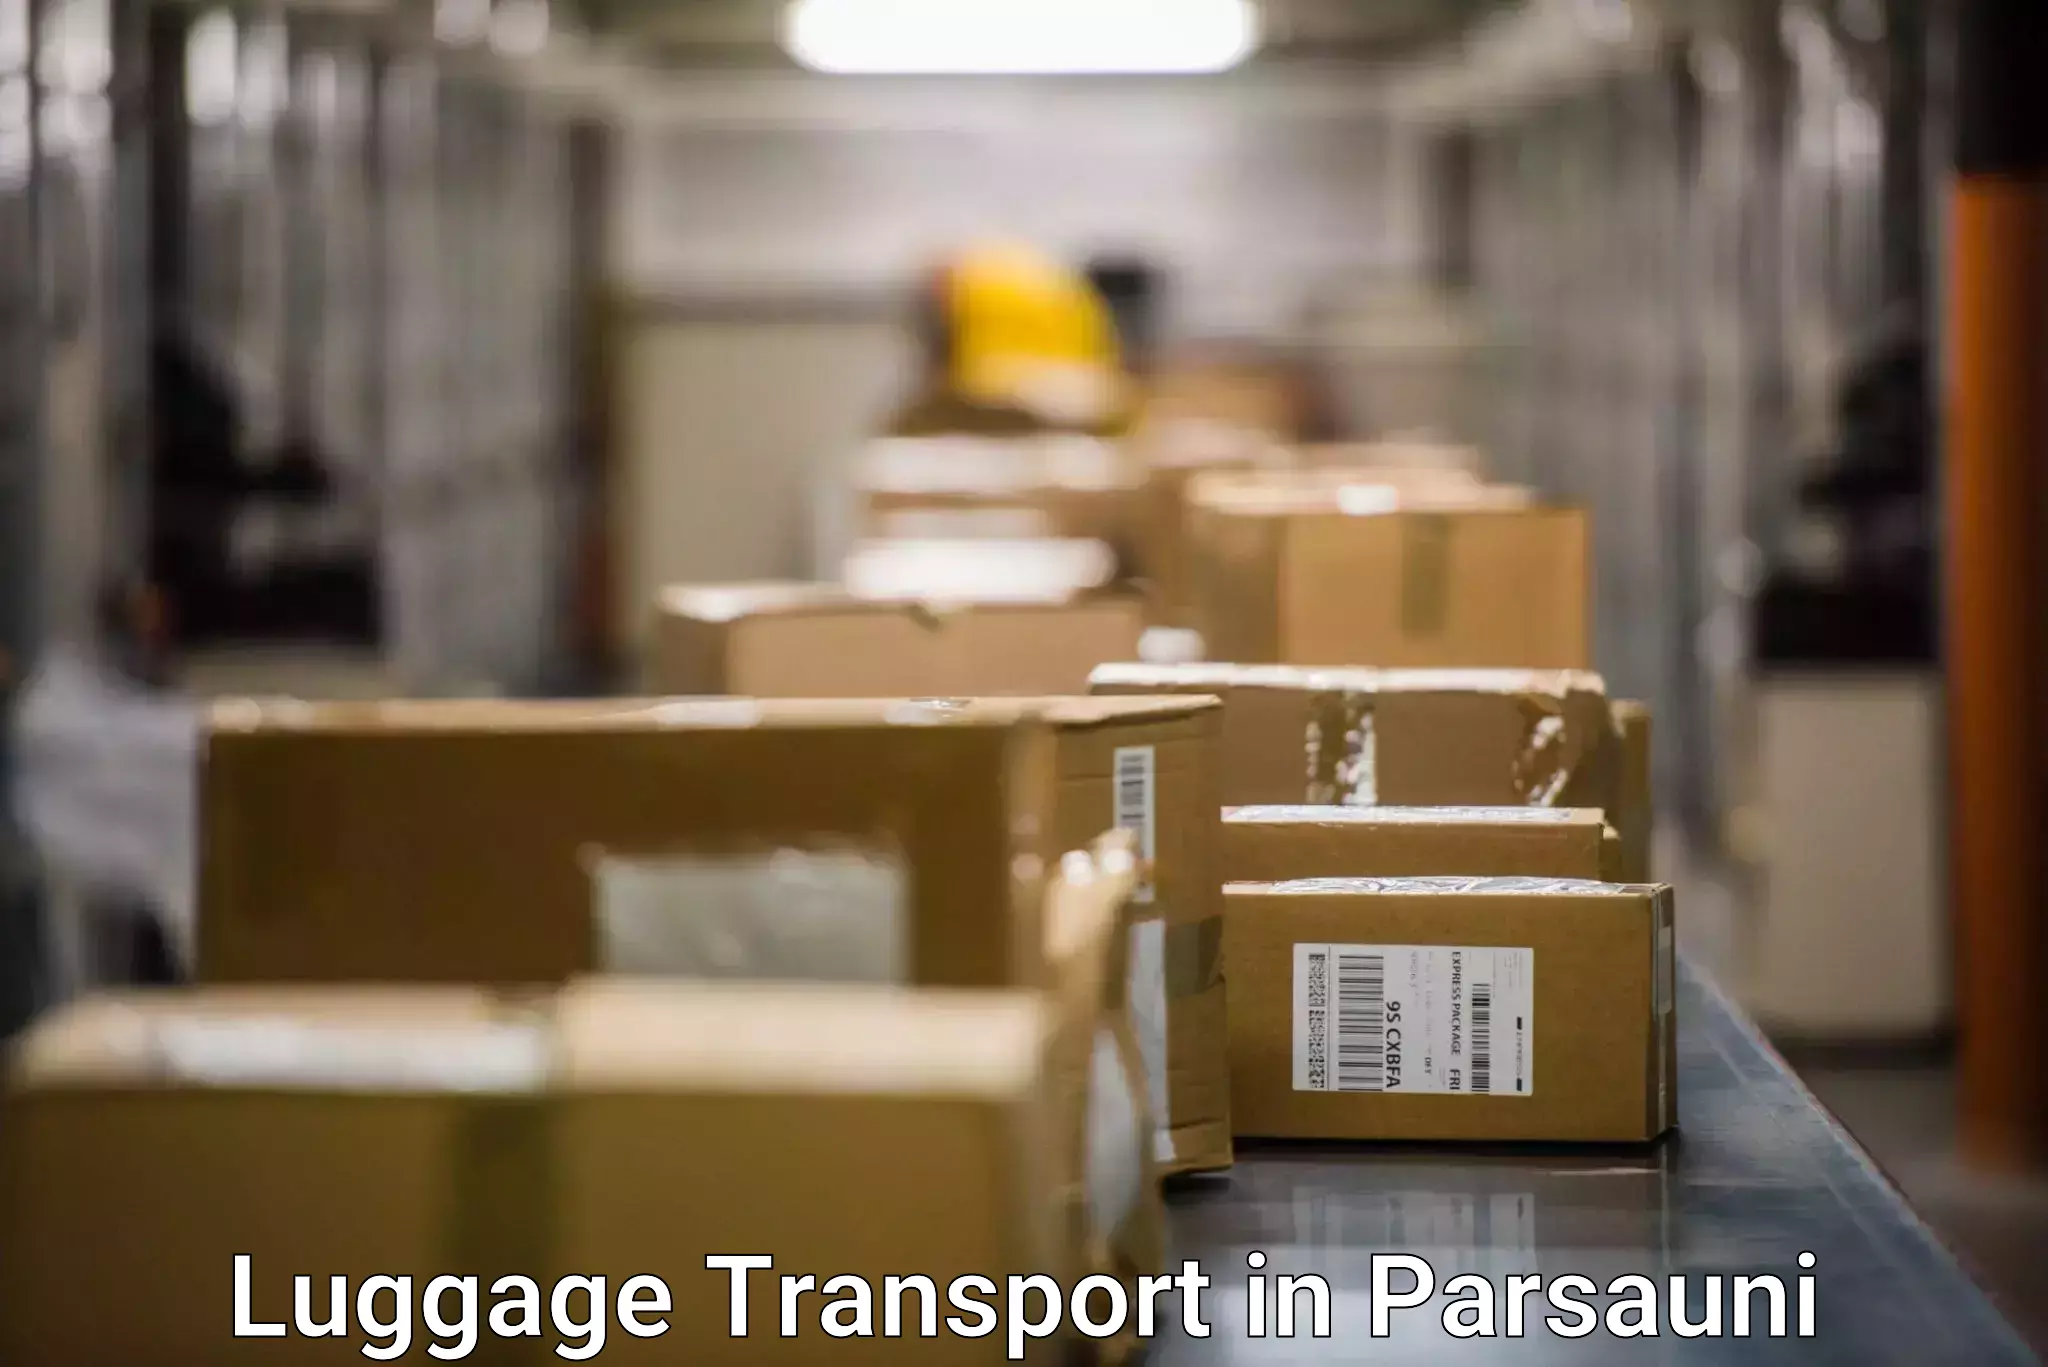 Group luggage shipping in Parsauni